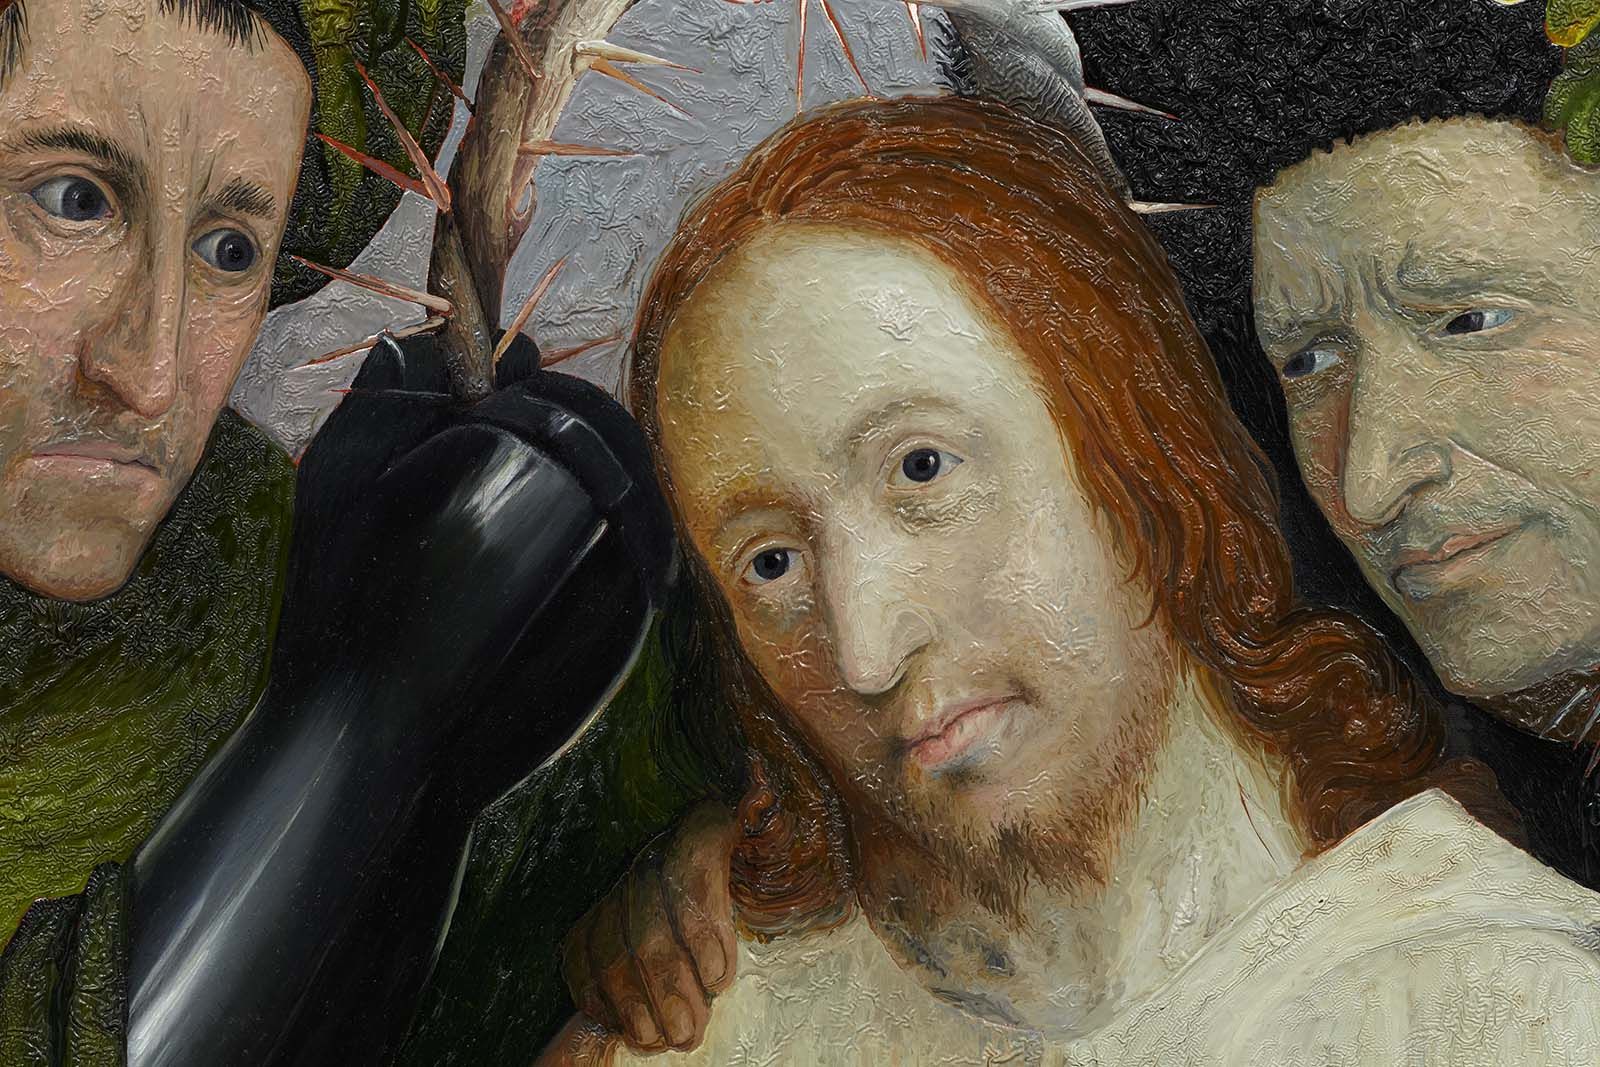 Copy of Christ Mocked by Hieronymus Bosch by Mark Alexander with wrinkling effect (detail).